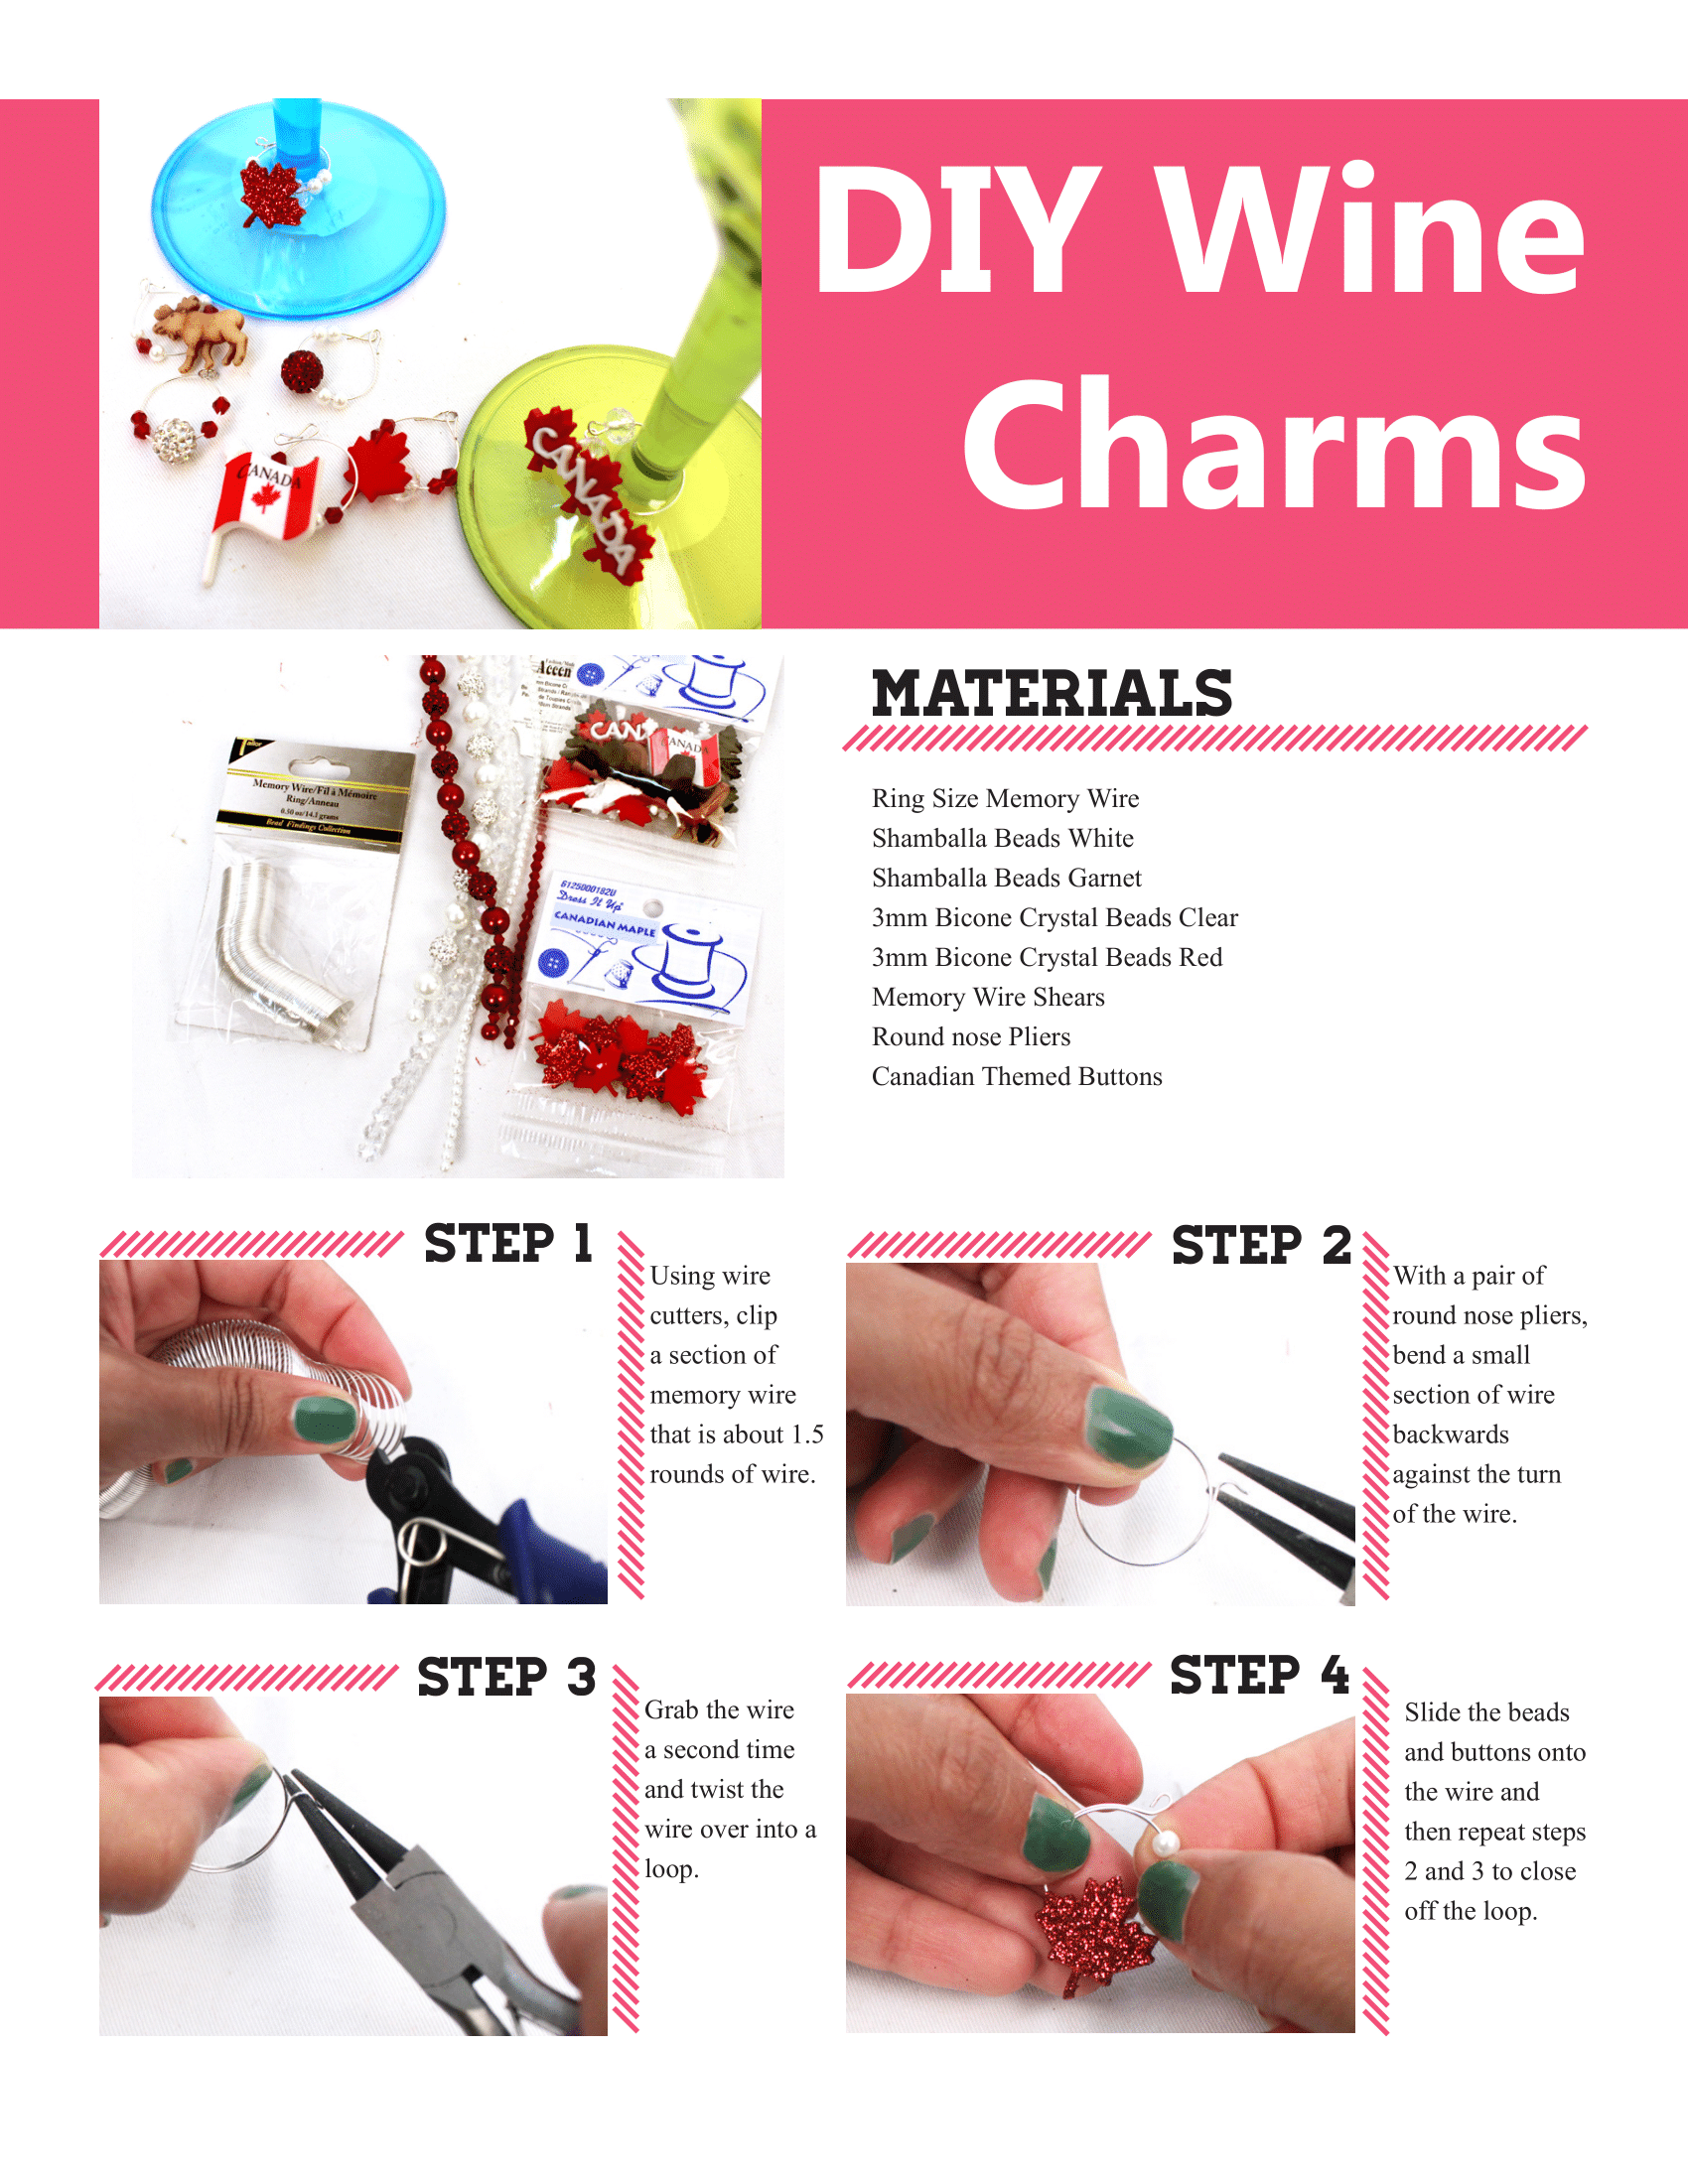 Materials & steps to create your wine charms